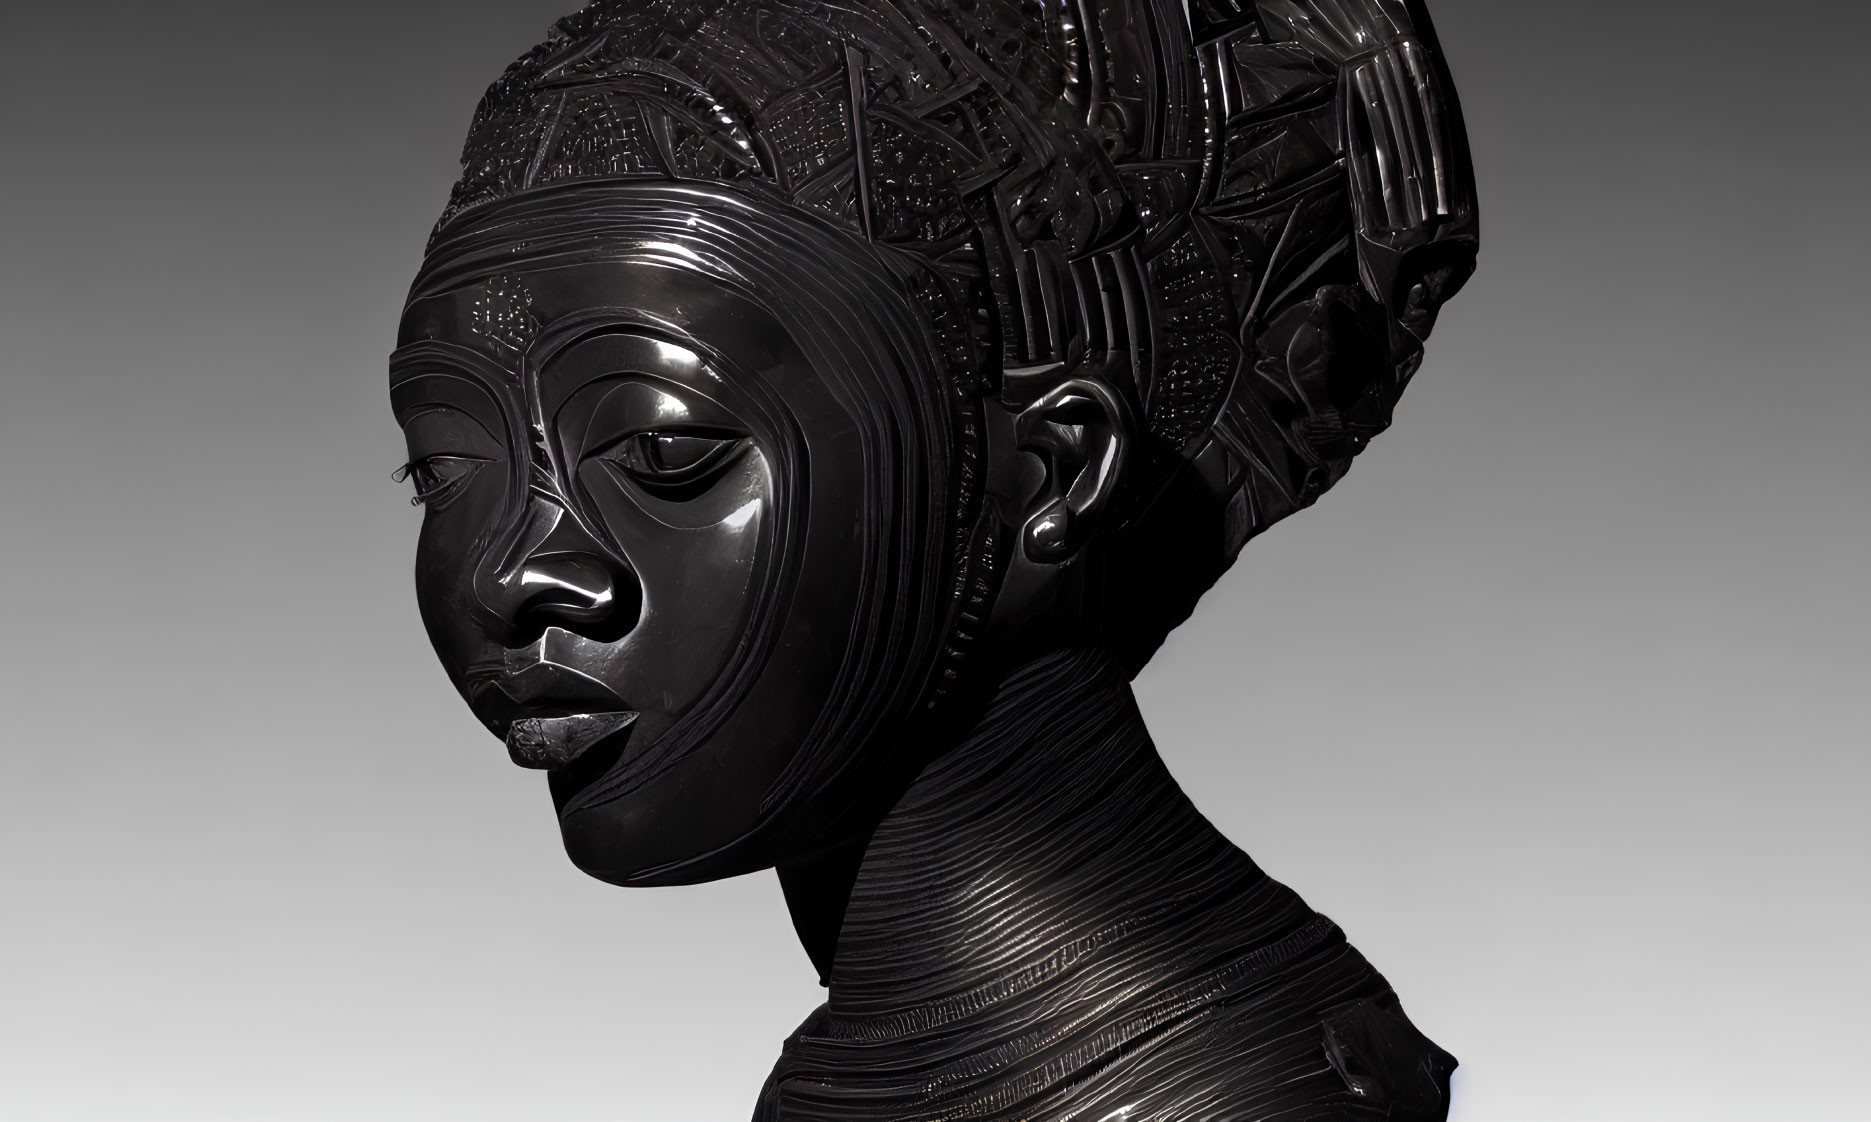 Intricately patterned black sculpture of woman's head and torso on gradient background